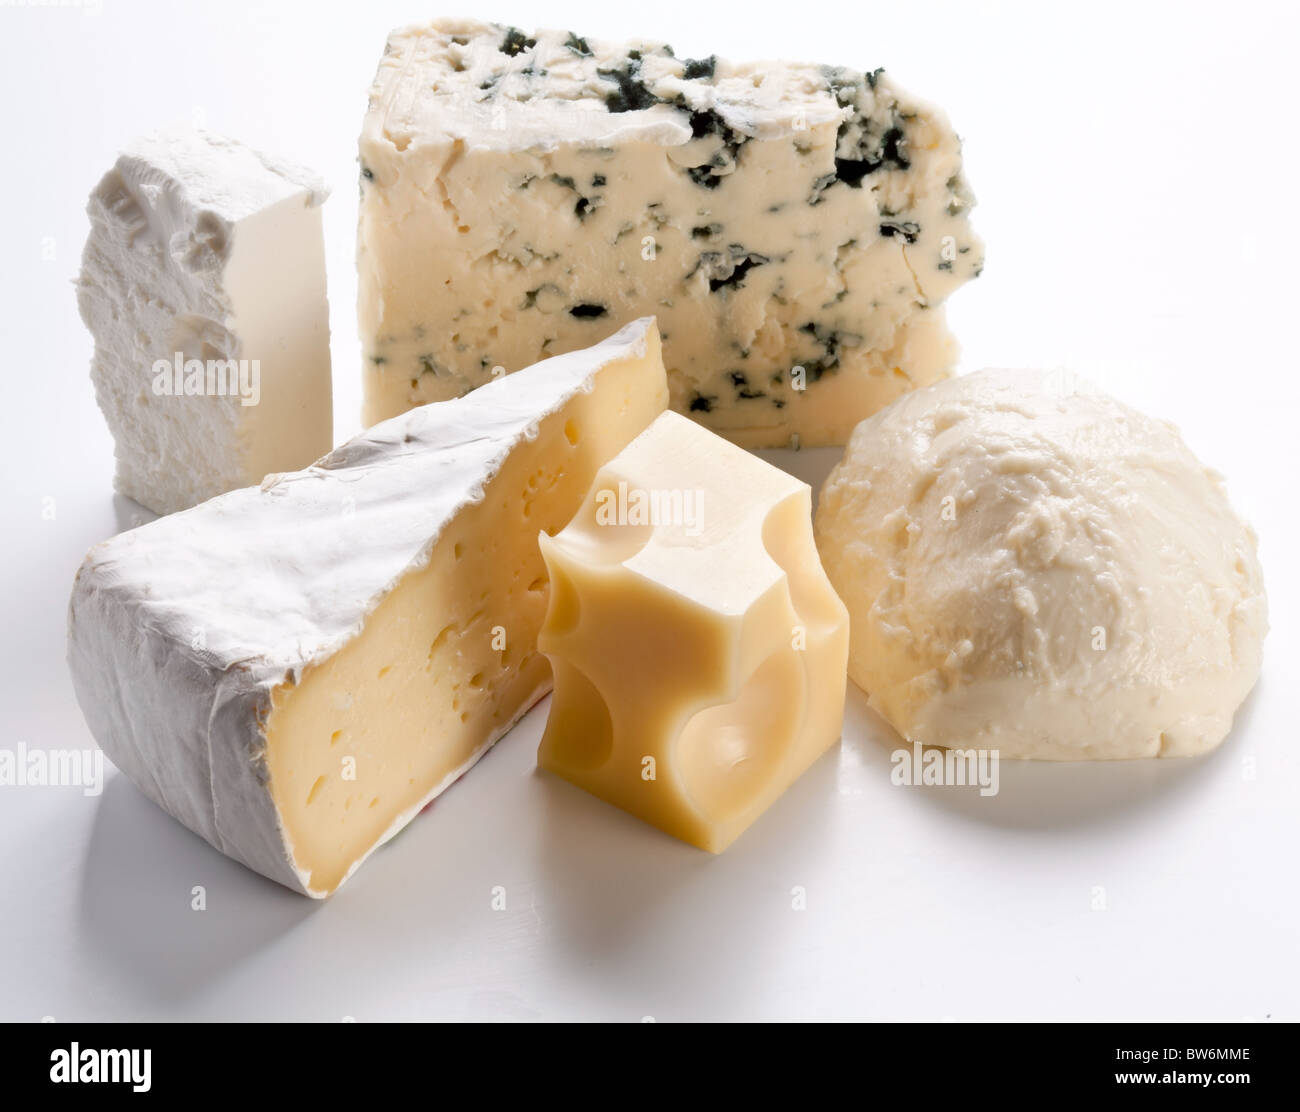 Various types of cheeses on a white background. Stock Photo